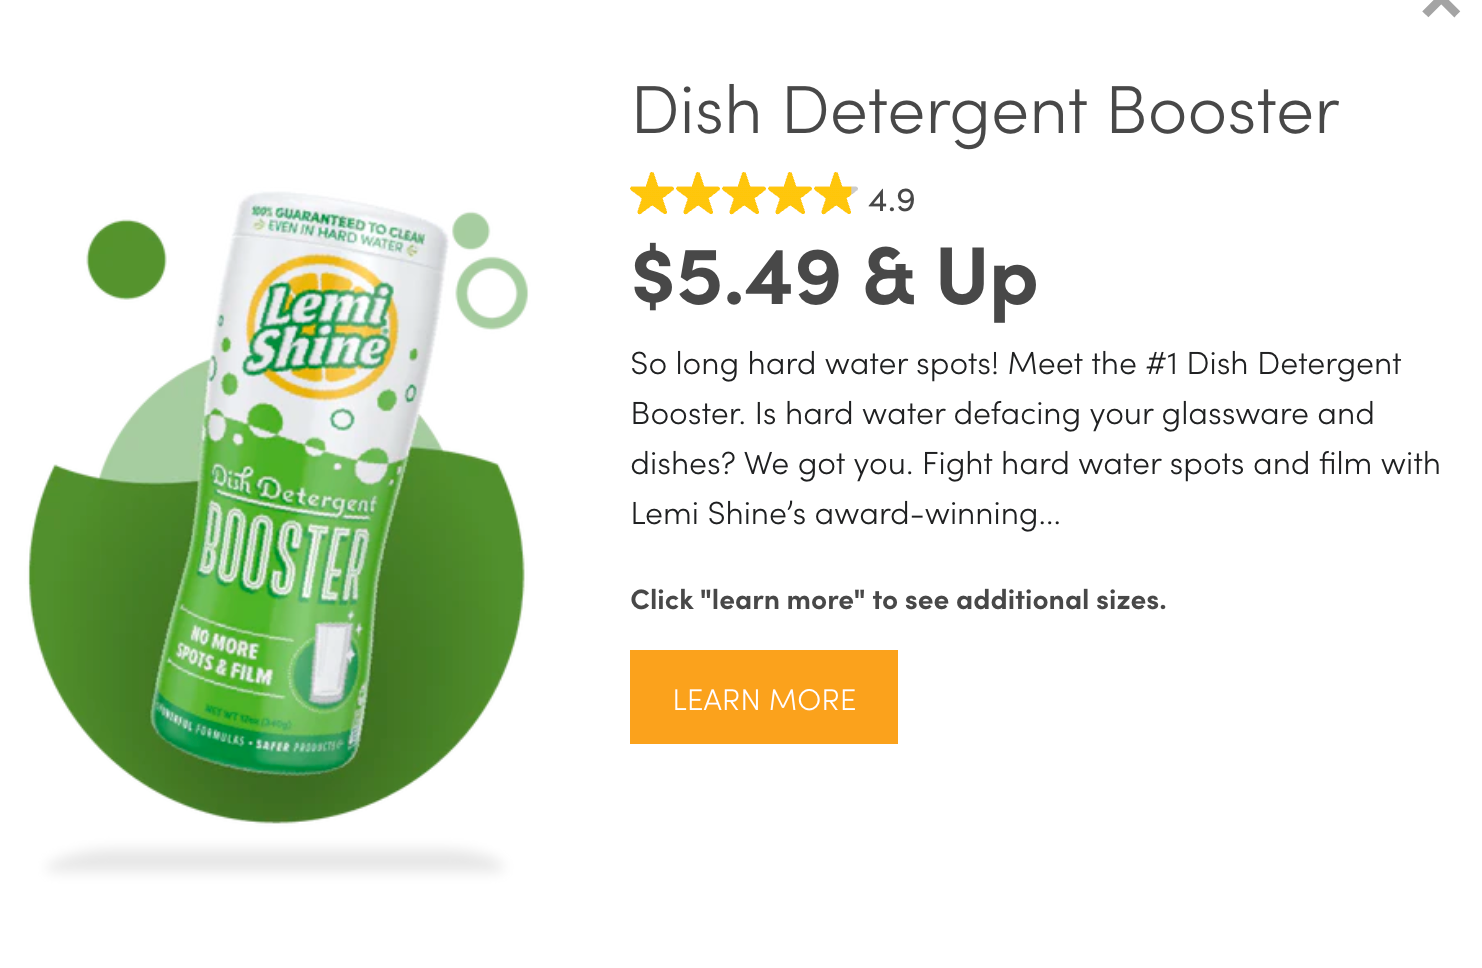 Lemi Shine Dish Detergent Booster $5.49 &amp; Up, with a 4.9 out of 5 stars review